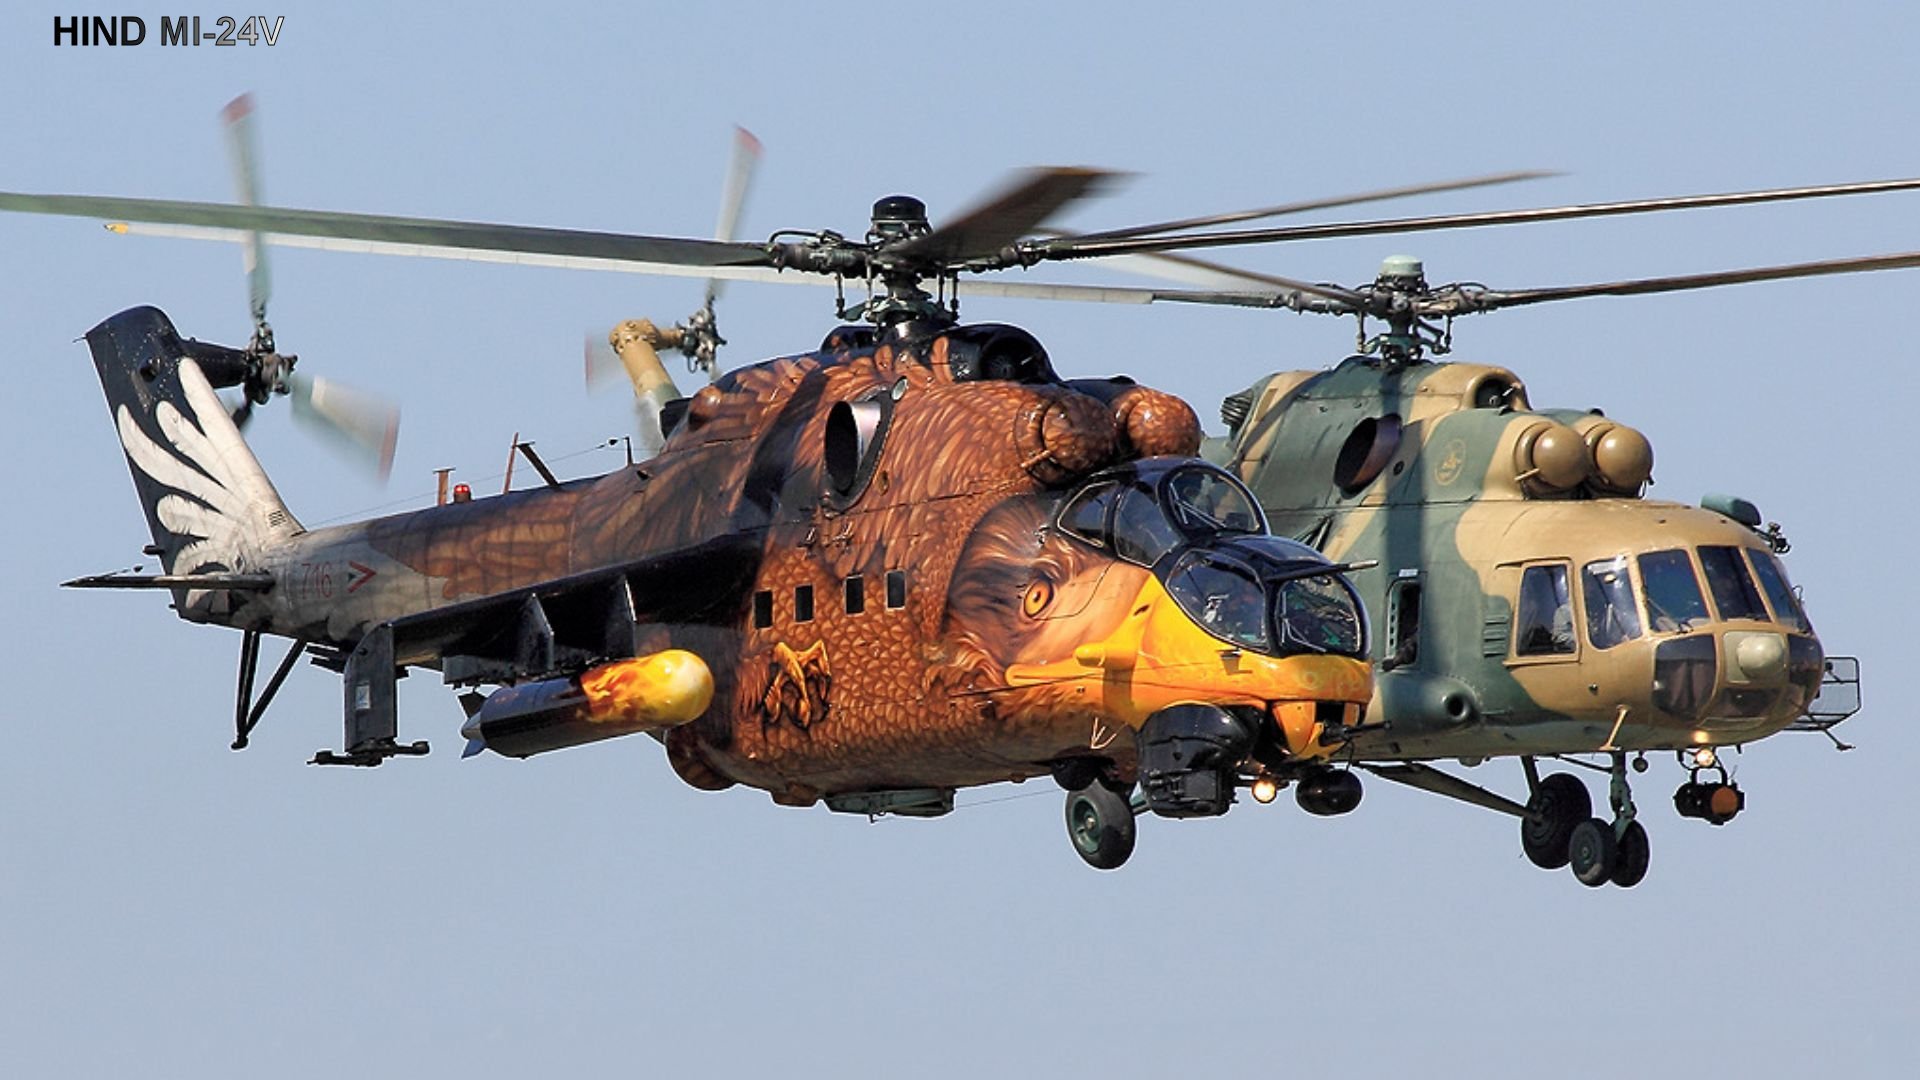 mi 24, Hind, Gunship, Russian, Russia, Military, Weapon, Helicopter, Aircraft,  69 Wallpaper